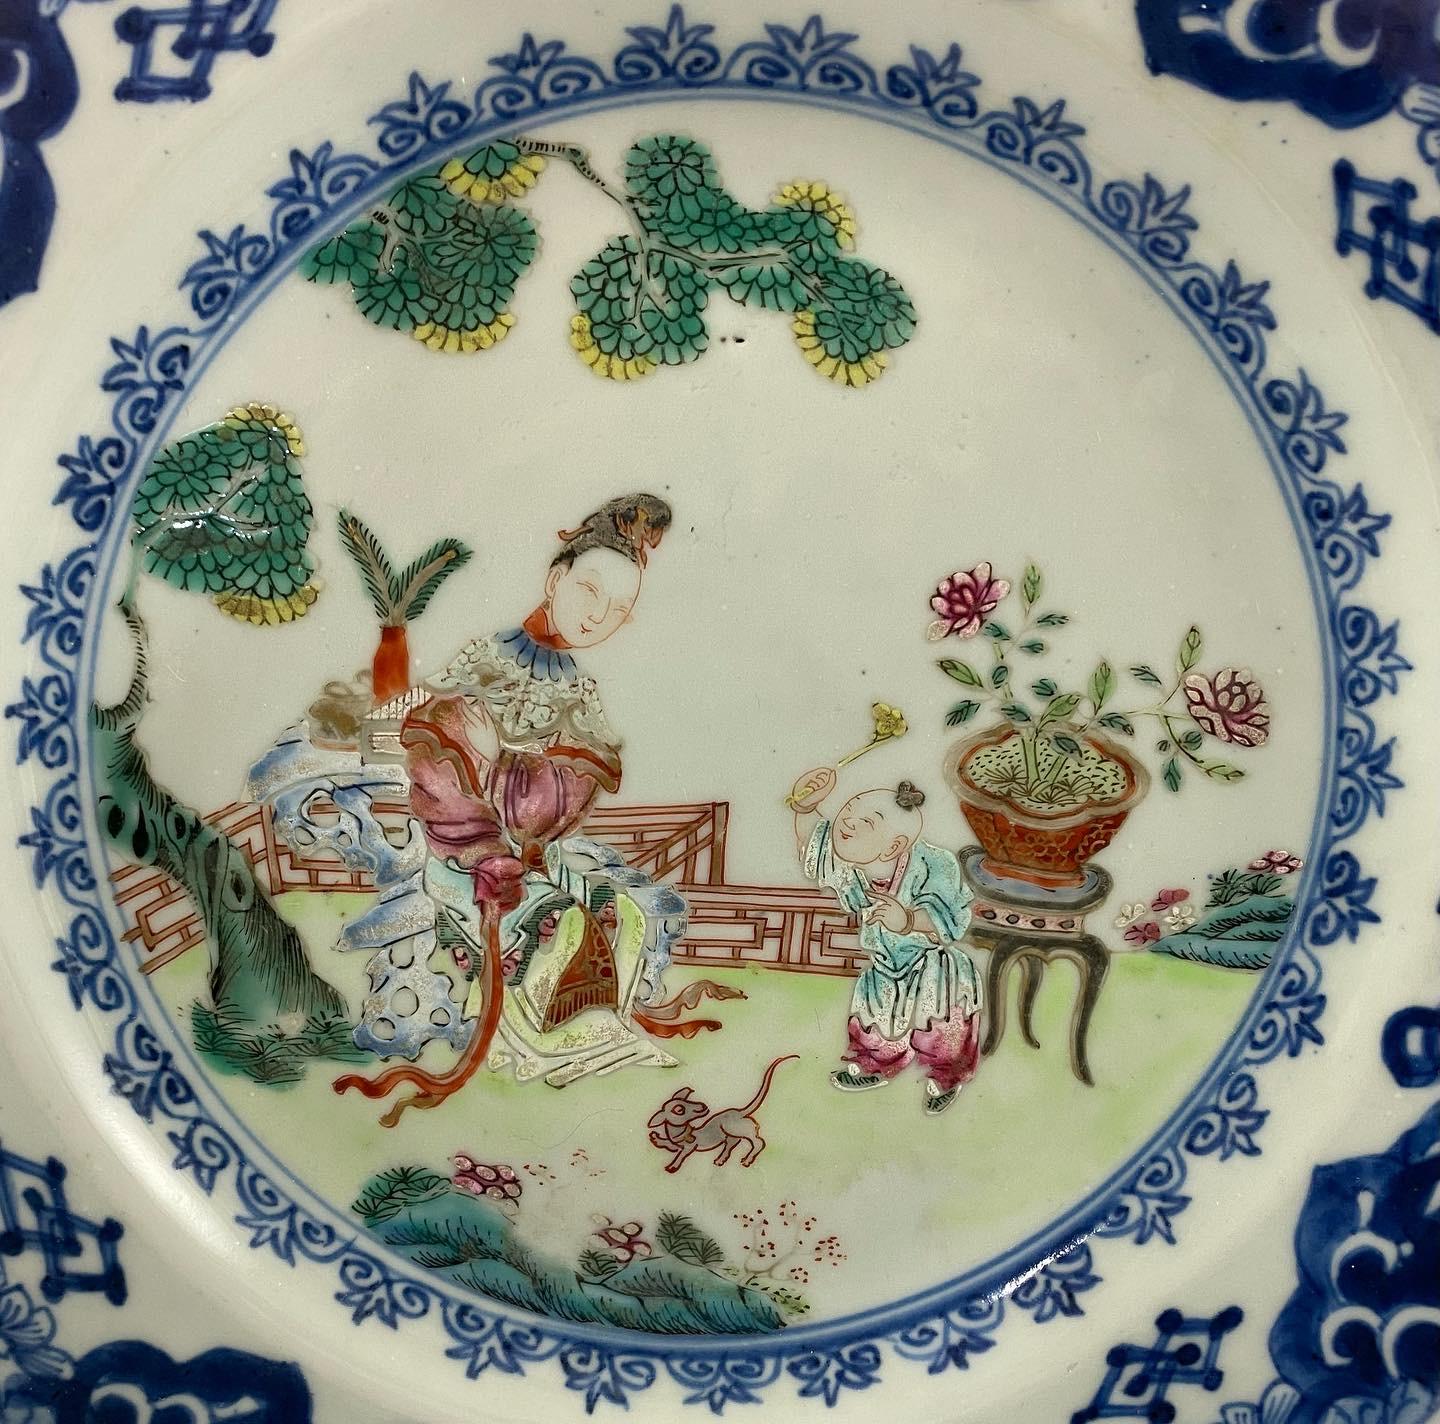 Chinese porcelain plate, c. 1760, Qianlong Period. The shaped plate is carefully hand painted in famille rose enamels, with a scene of a mother and a child, in a garden, with a small dog. By the lady, rests a gilt censer, a box, and a vase of